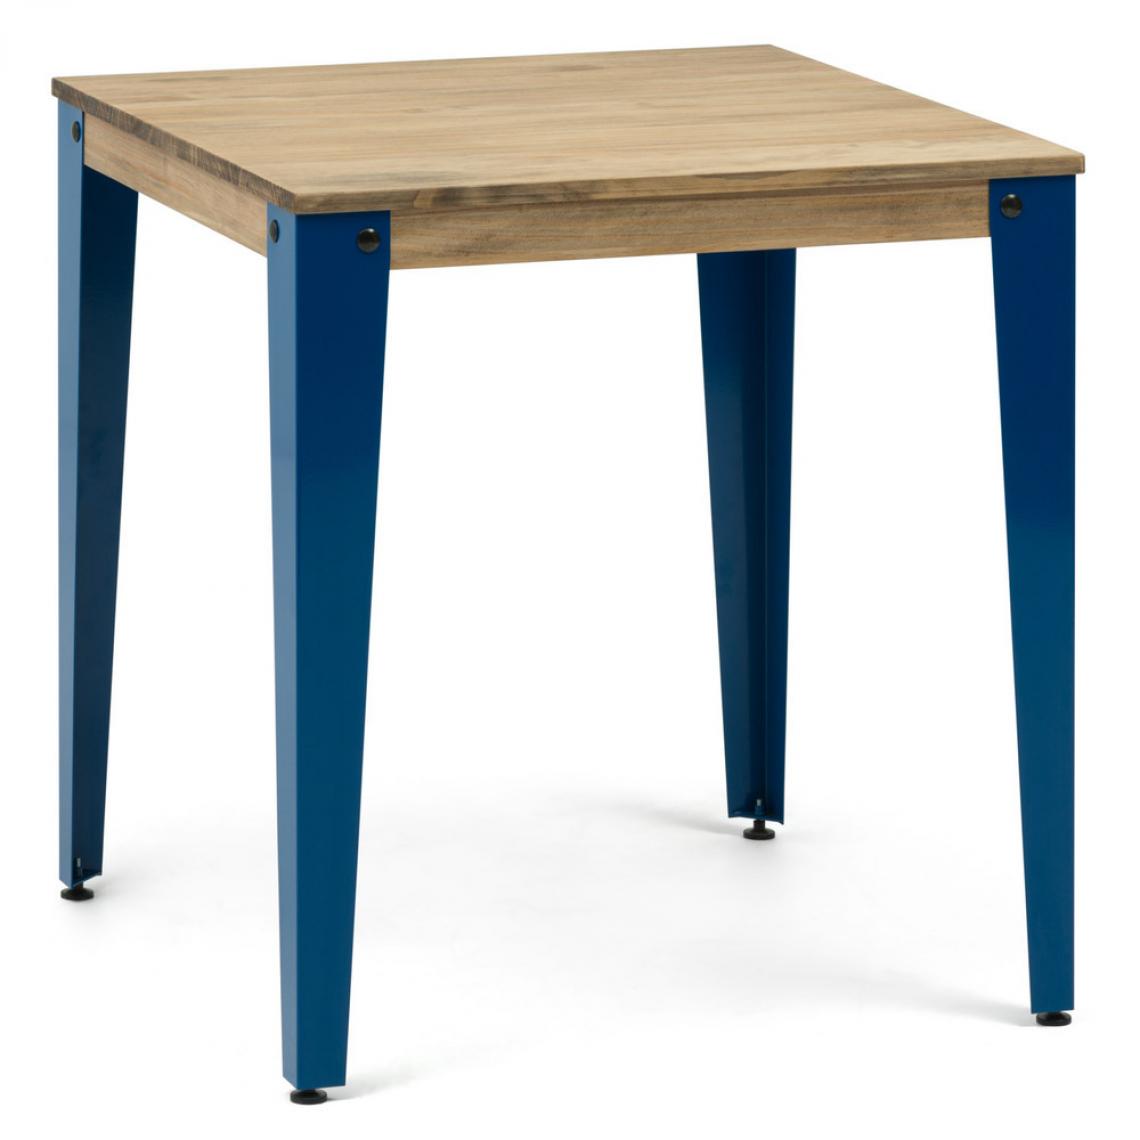 BOX FURNITURE - Table Salle à Manger Lunds 59x59x75cm Bleu-Vieilli. Box Furniture - Tables à manger